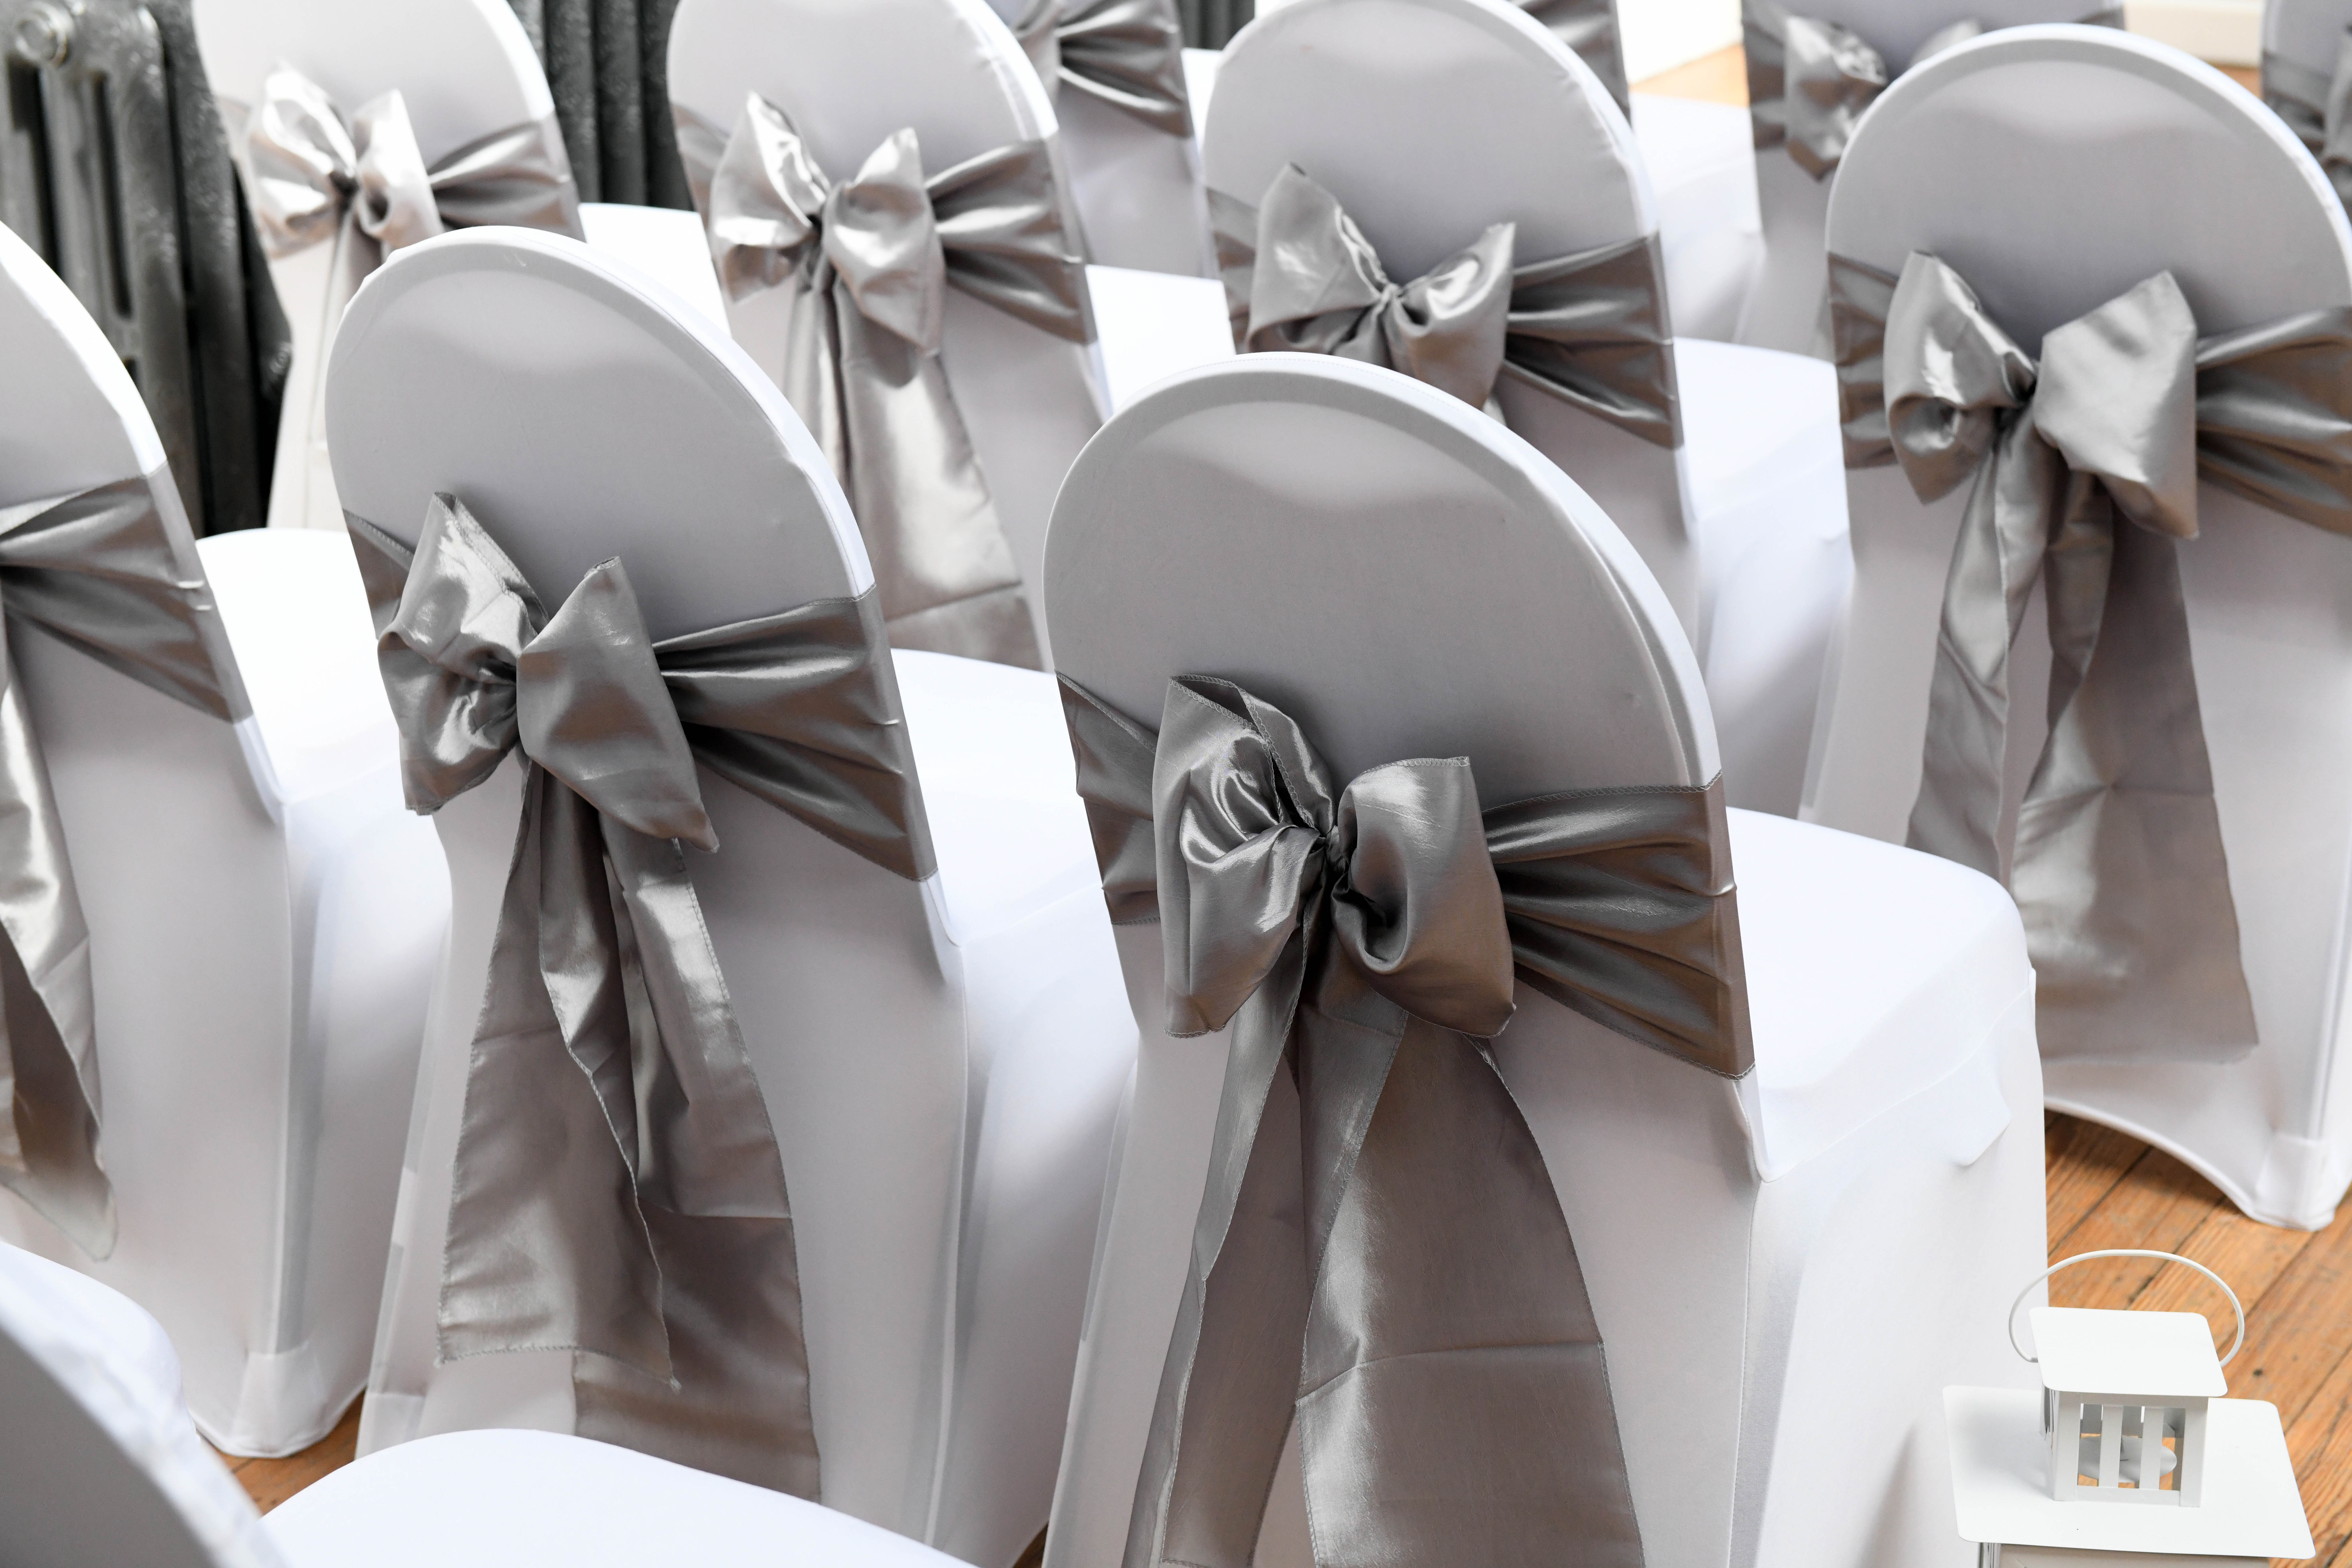 image of Venue Dressing - chairs in white with bows on the back